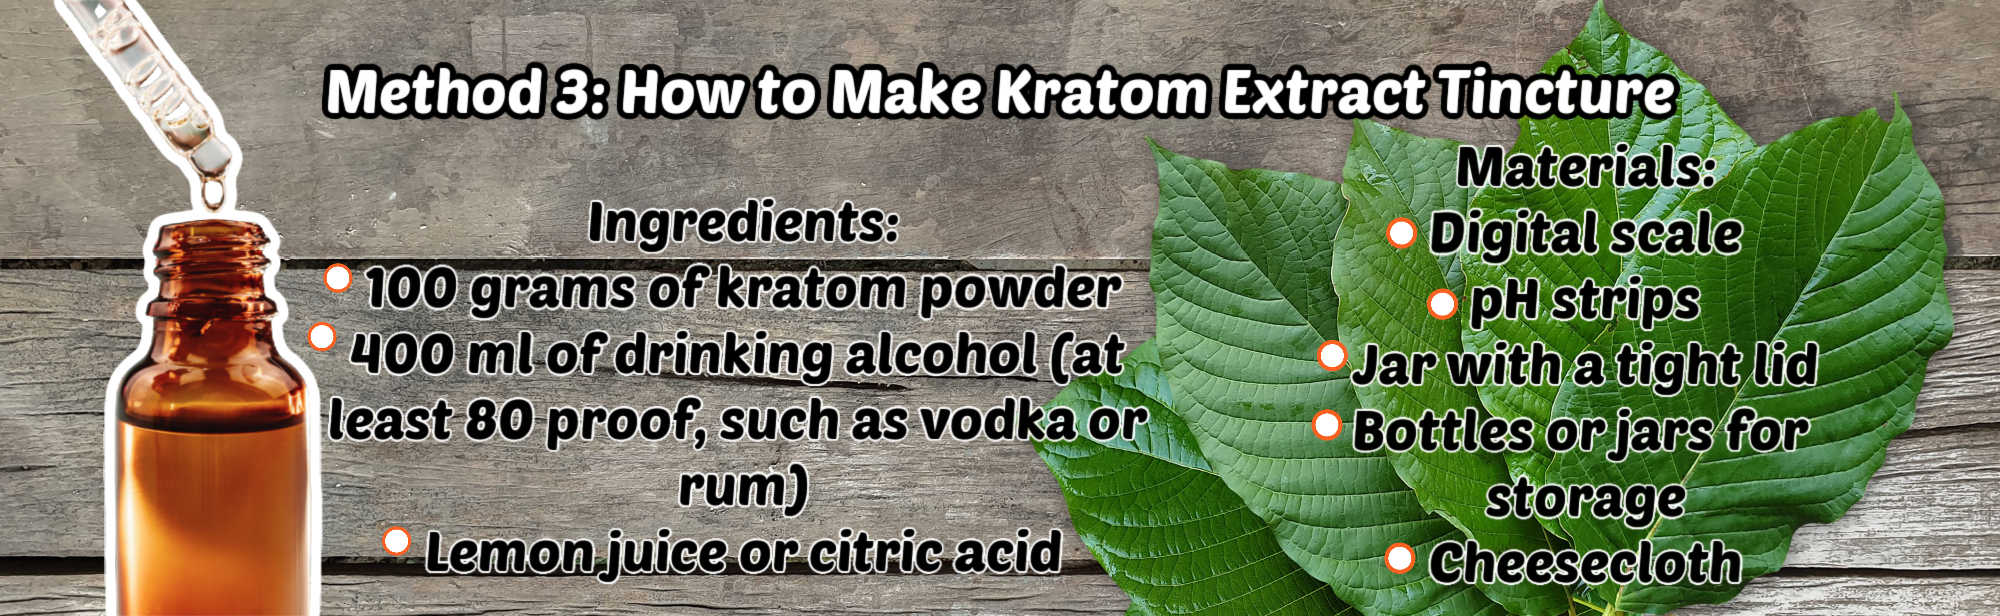 image of how to make kratom extract tincture